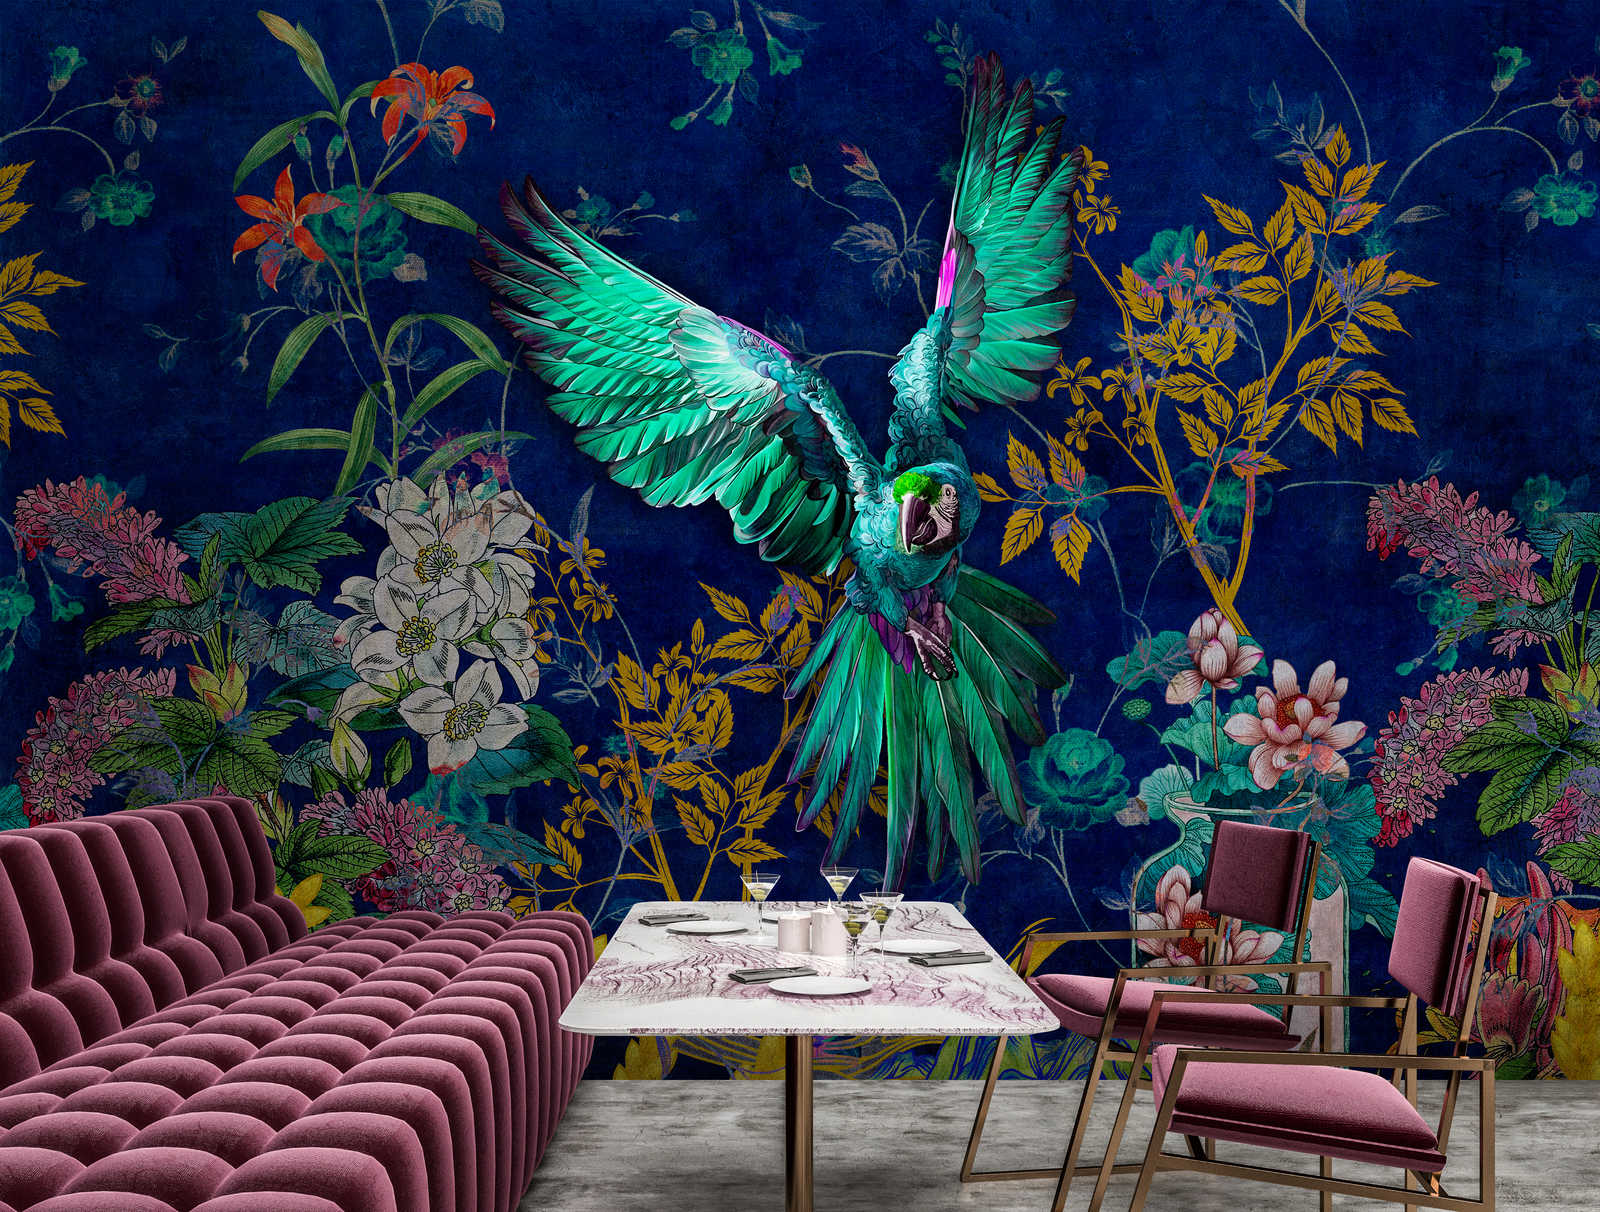             Tropical Hero 1 - wall mural flowers & parrot intense colours
        